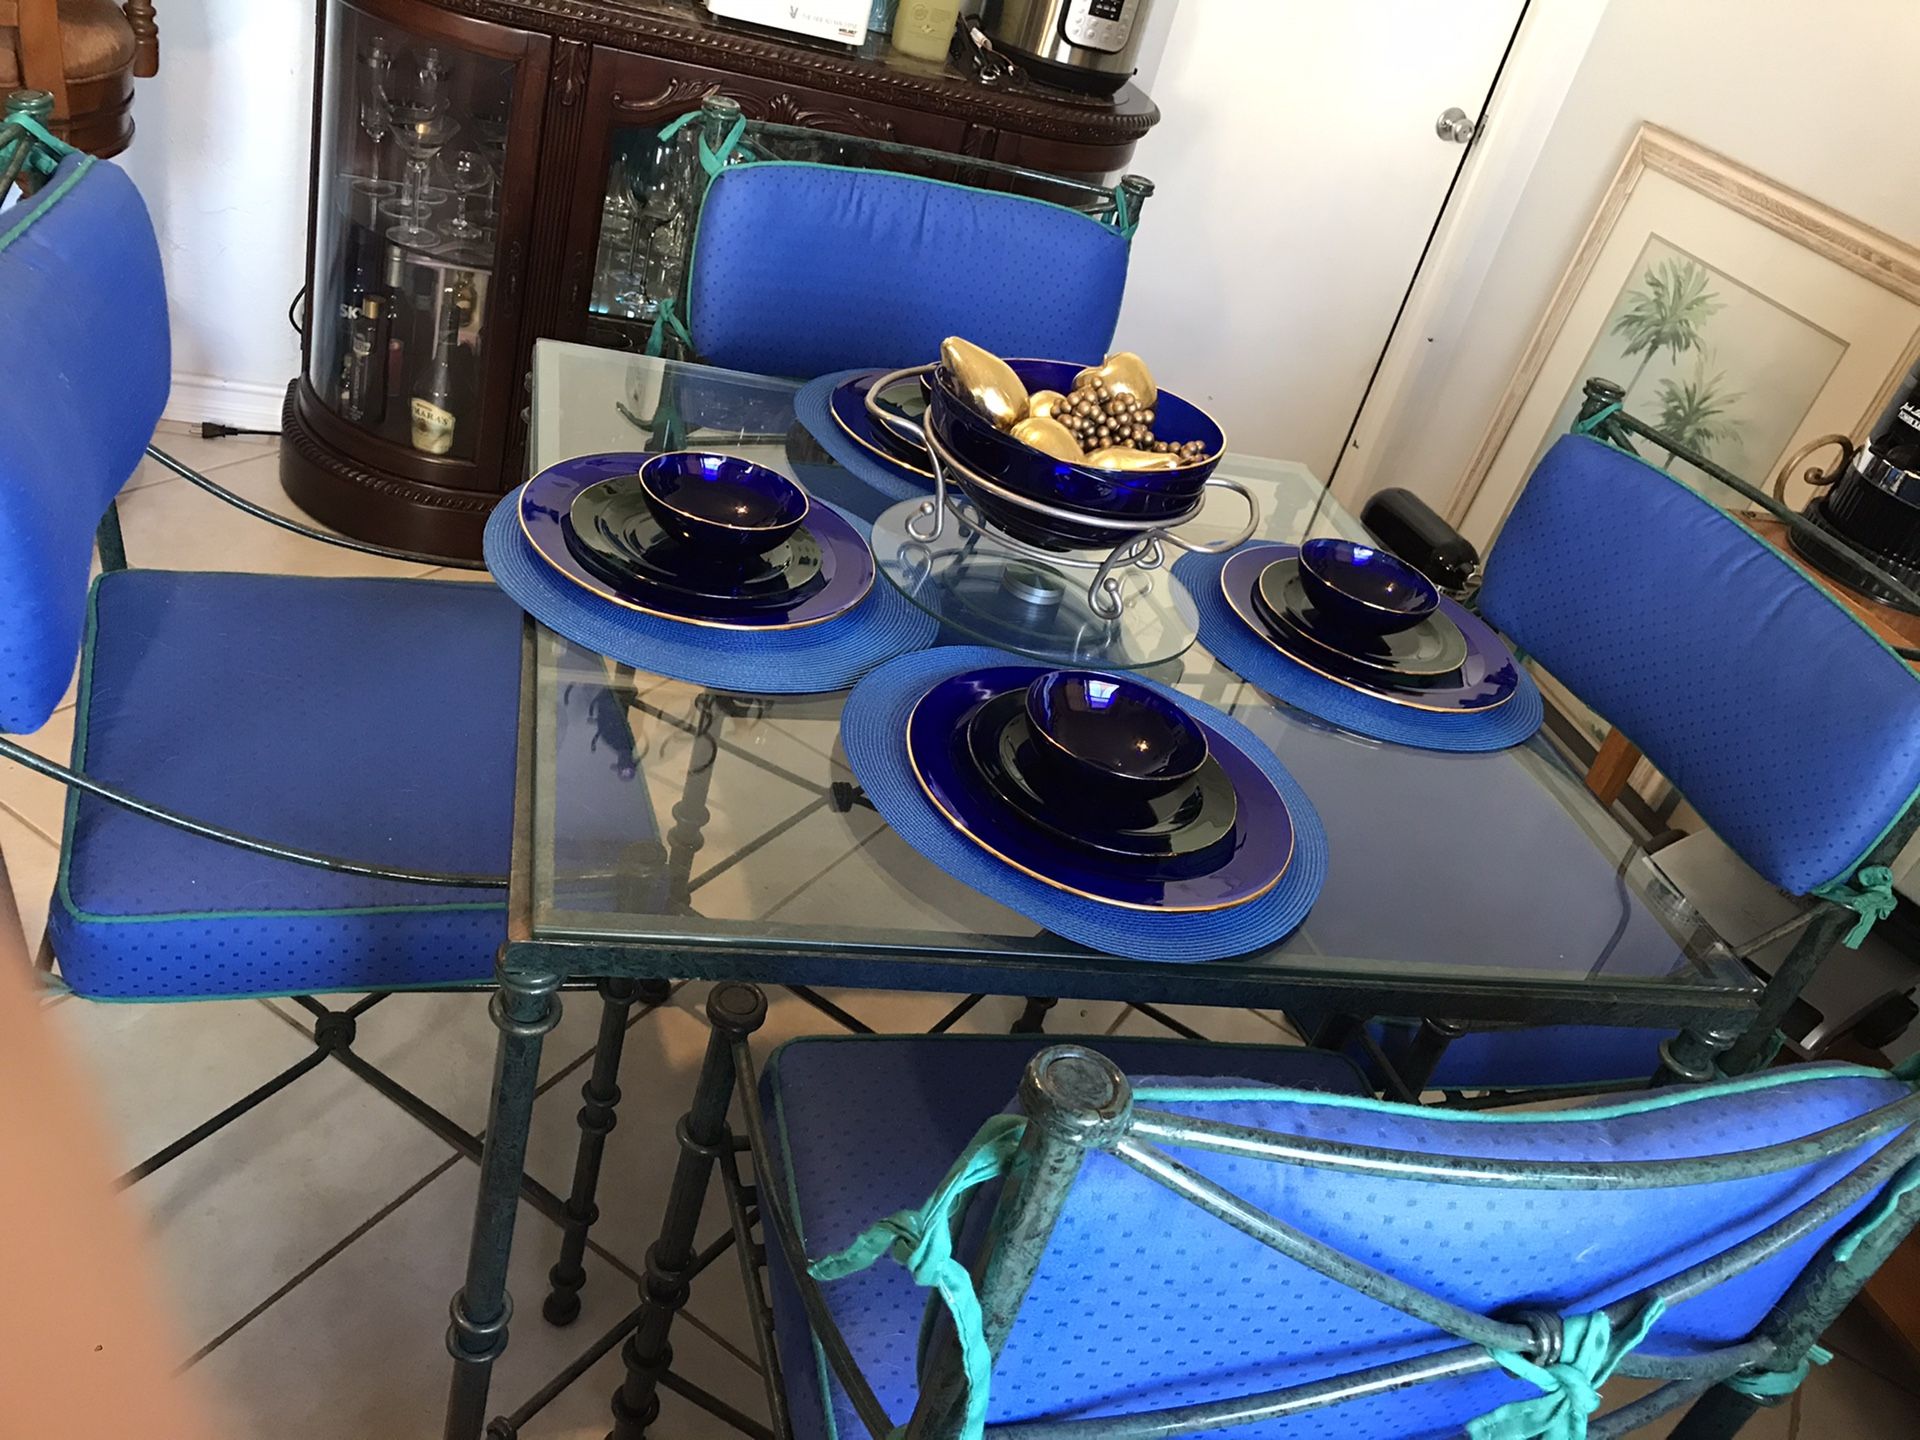 Dining Table and 4 chairs wrought iron/glass top and upholstered custom cushions